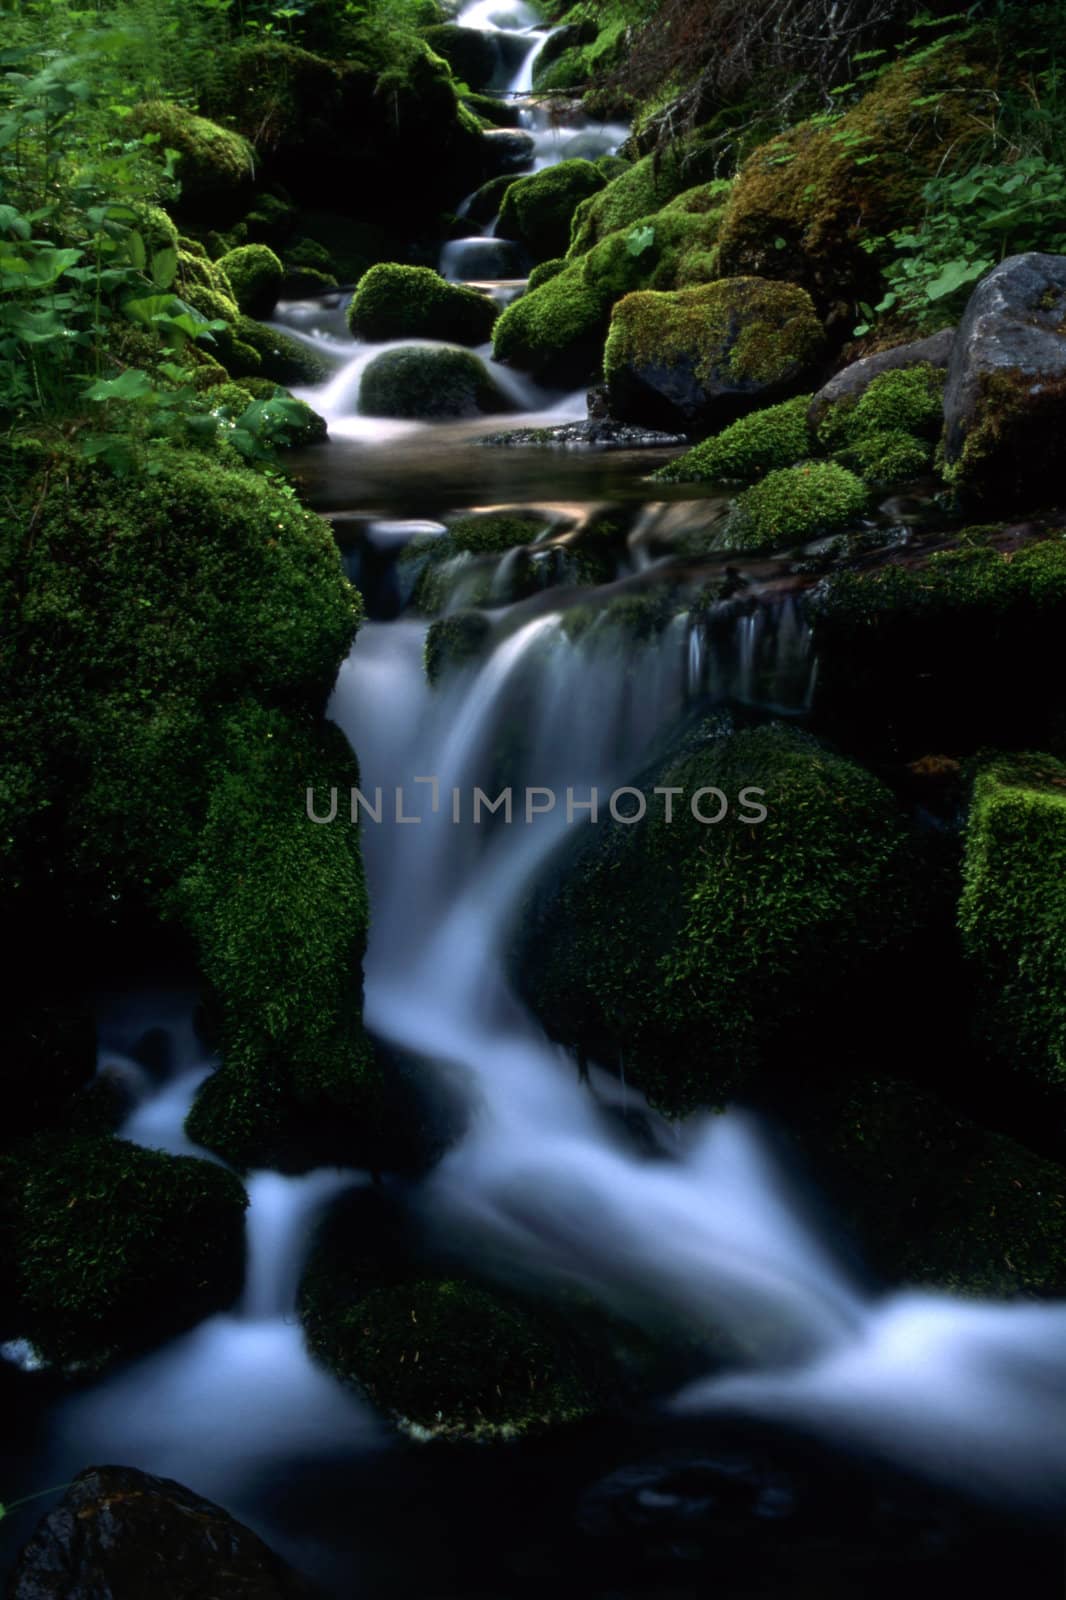 Beautiful mountain stream with green moss and rocks